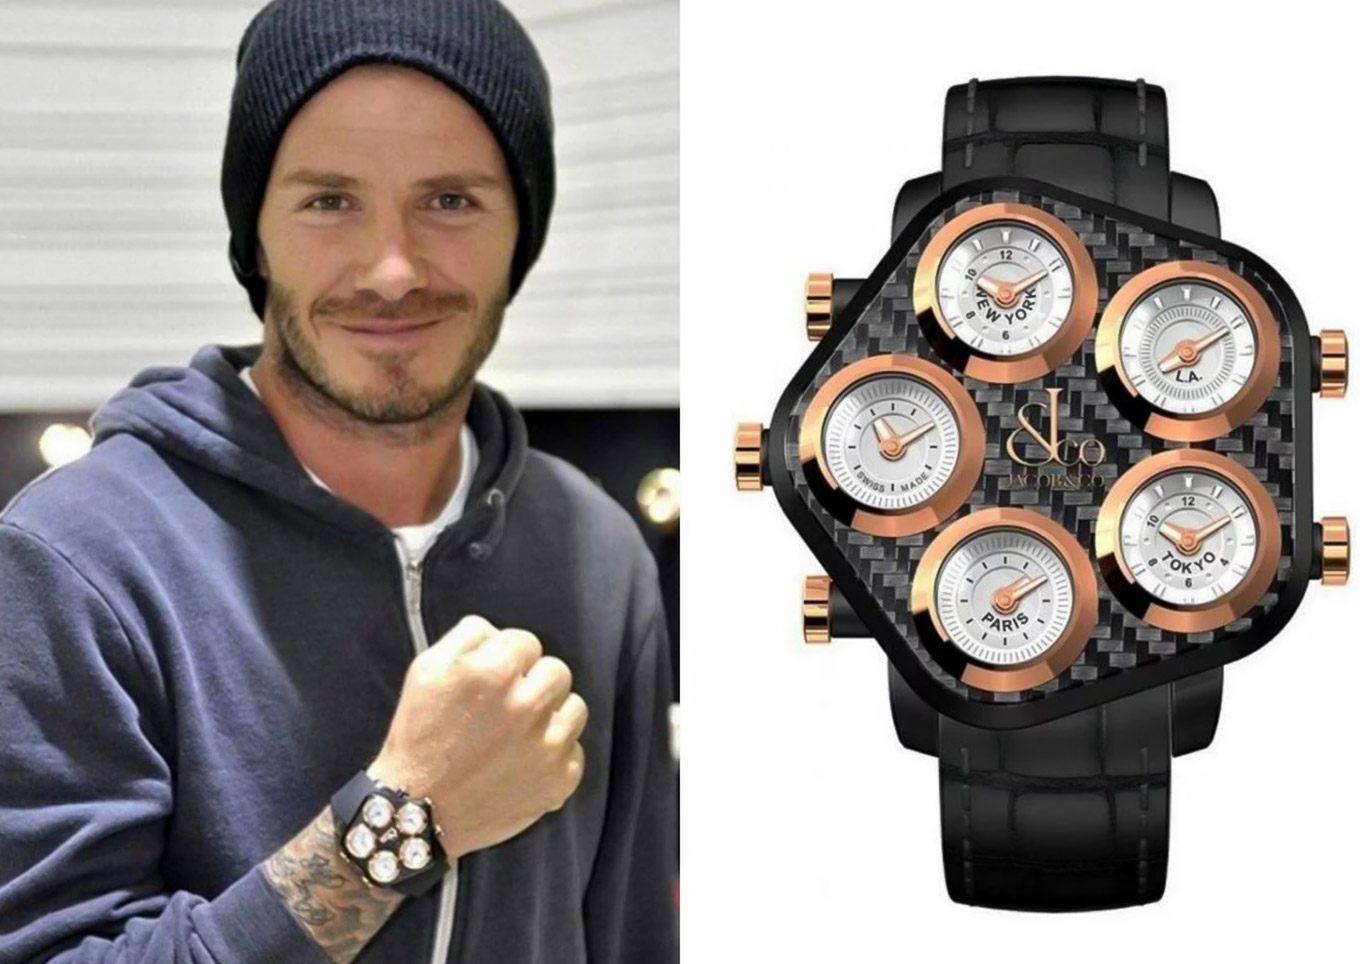 David Beckham wearing the Jacob & Co. Global Five Time Zone